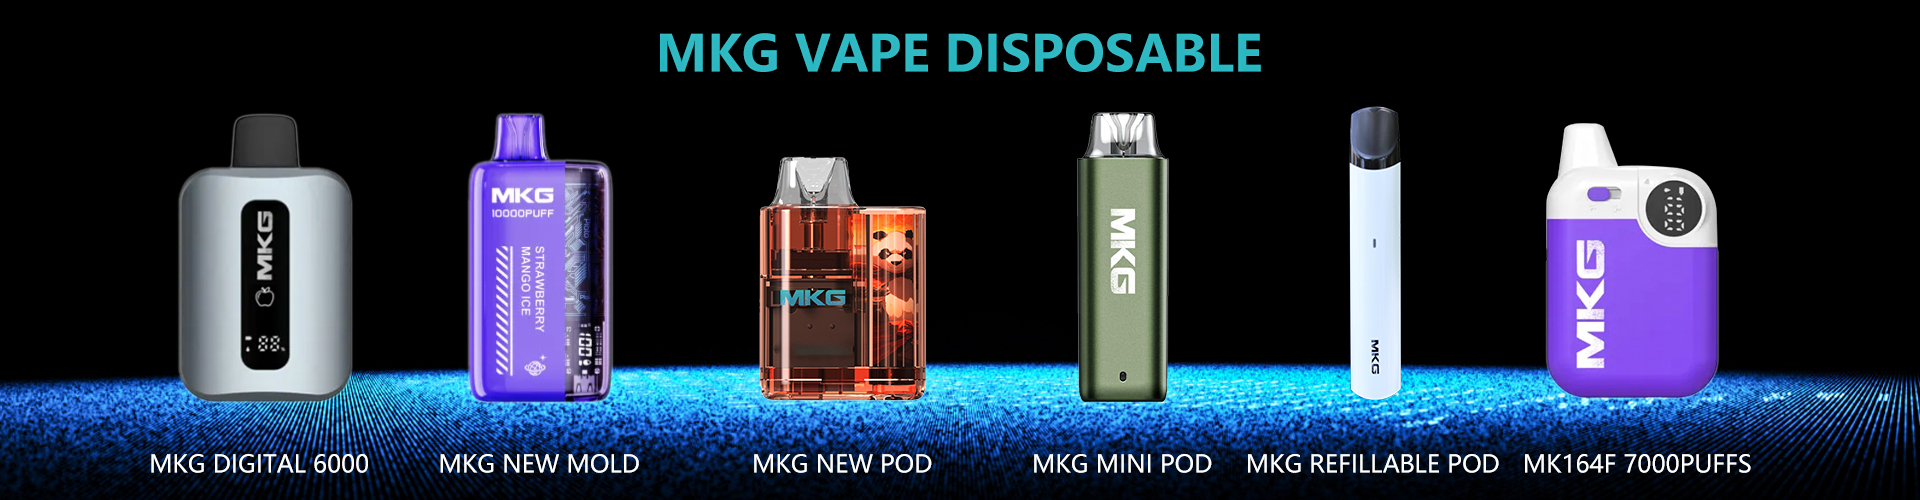 Disposable Vapes | Vape World Australia | Vaping Hardware Shop the most popular Disposable Vape Pens from brands like Puff Bar, Halo Vice, Pop Disposable. These single-use E-cigs come pre-filled with amazing flavors. Disposable vapes are ideal for smokers looking to switch to vaping, as they require no set up and no maintenance. The most popular of the ELFBAR disposable range is the original ELFBAR 600 disposable with its 550mah battery making it the perfect all-day vape.